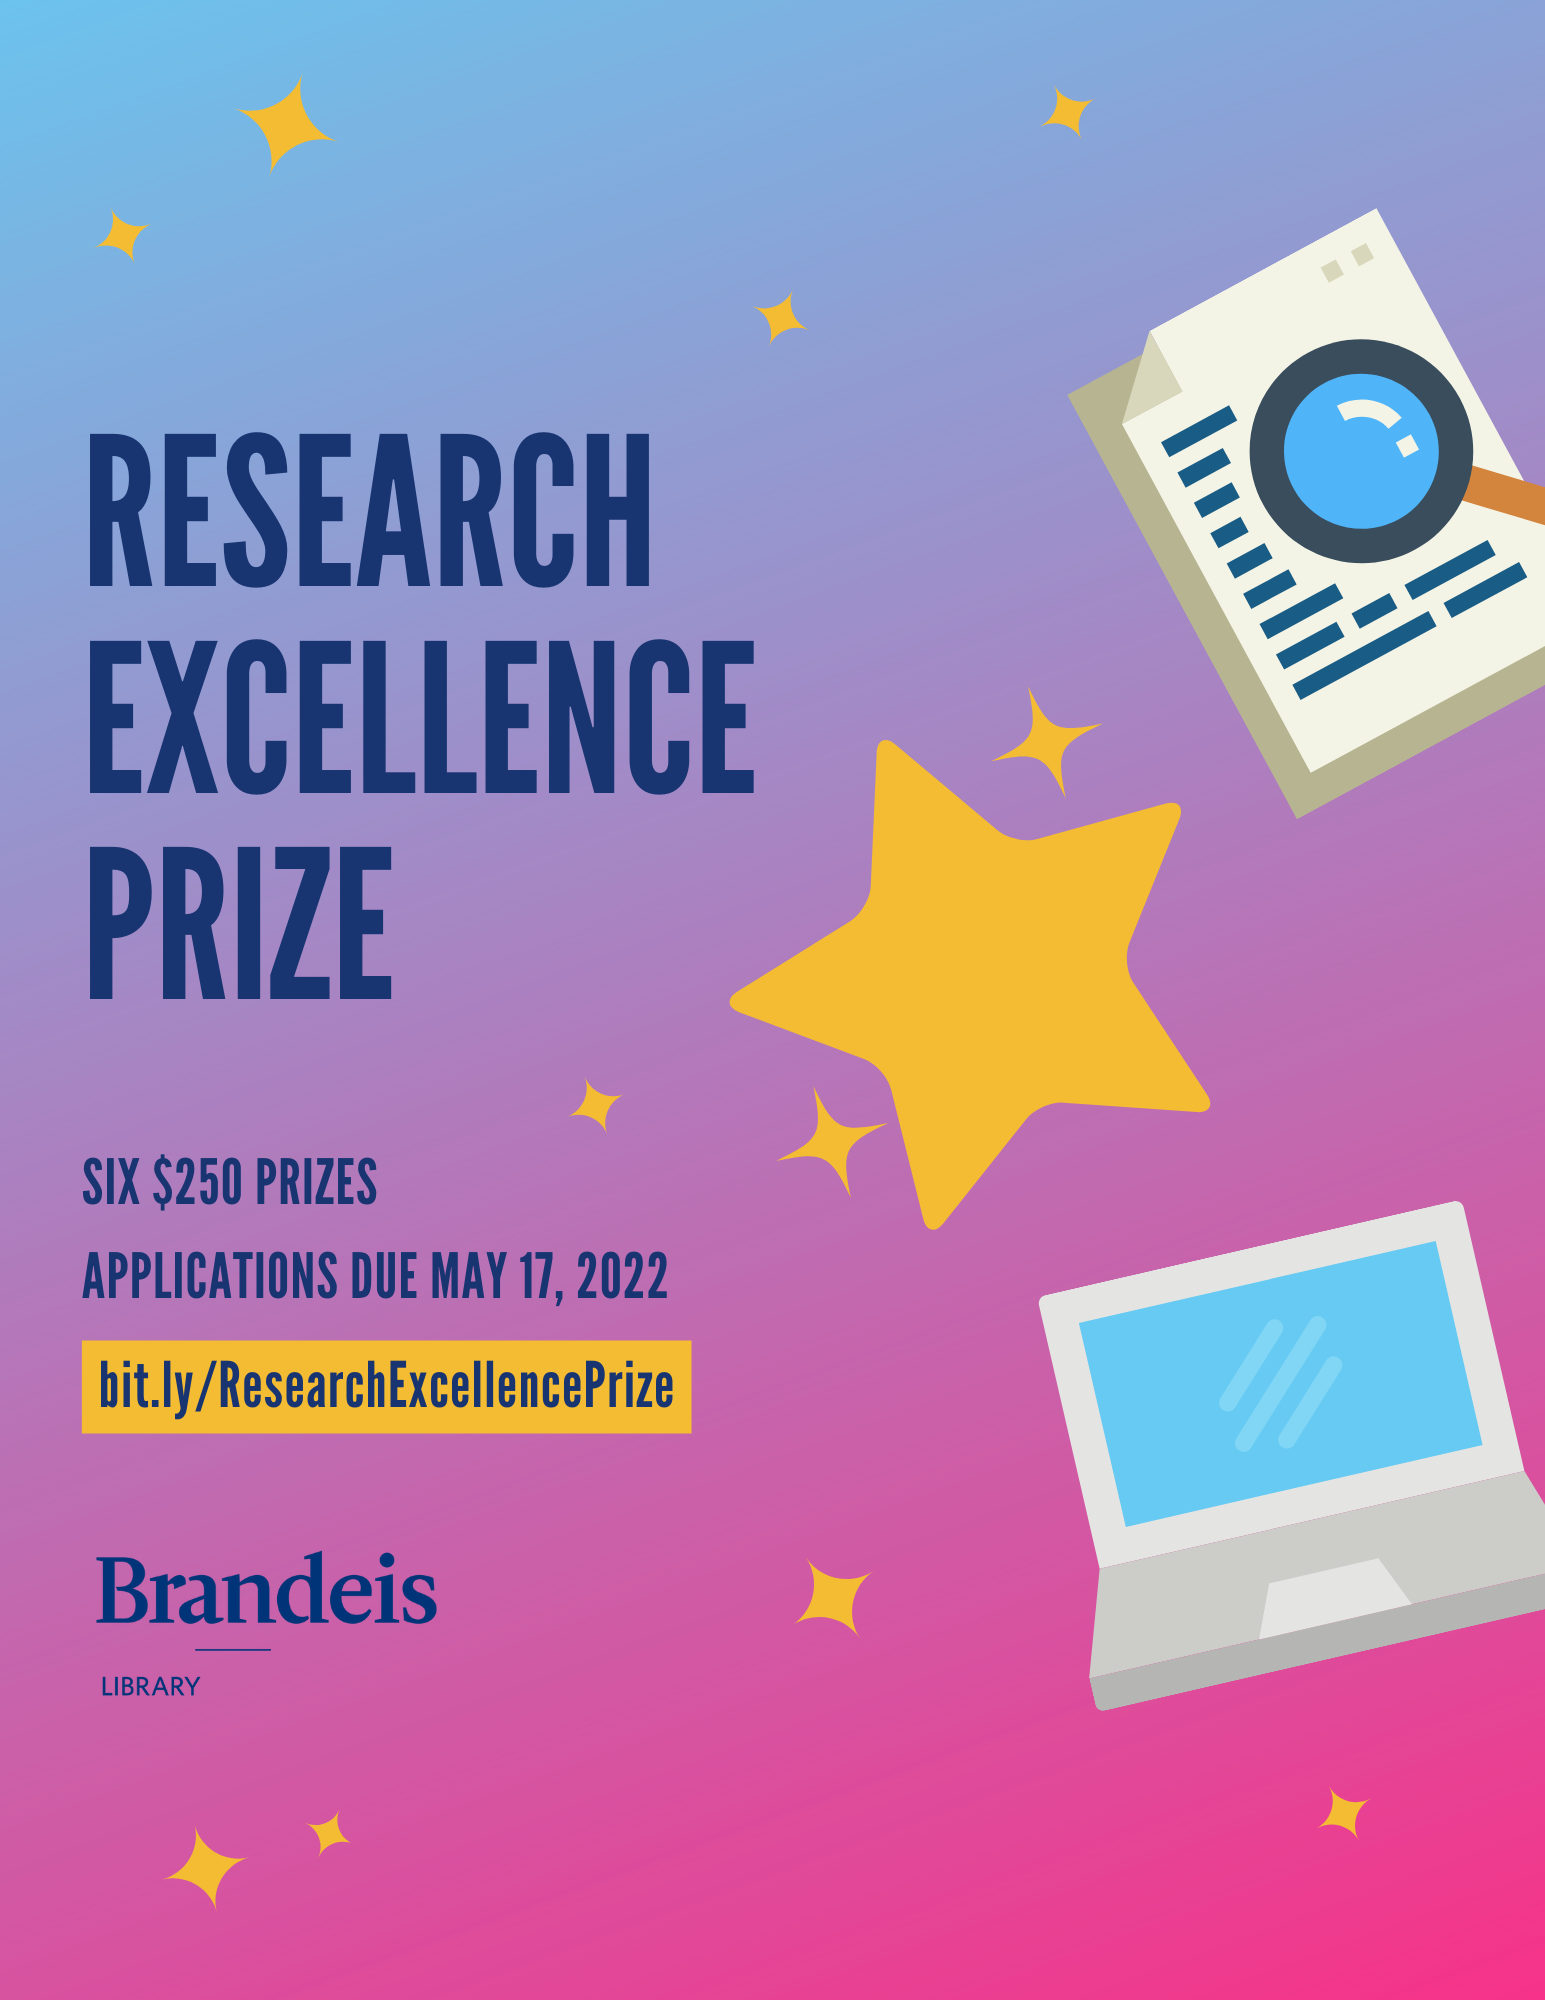 Blue to pink gradient background with cartoon images of stars, a laptop, and a paper and magnifying glass. Brandeis Library logo in bottom left corner. Text: Research Excellence Prize, six $250 prizes, application due May 17, 2022, bit.ly/ResearchExcellencePrize.